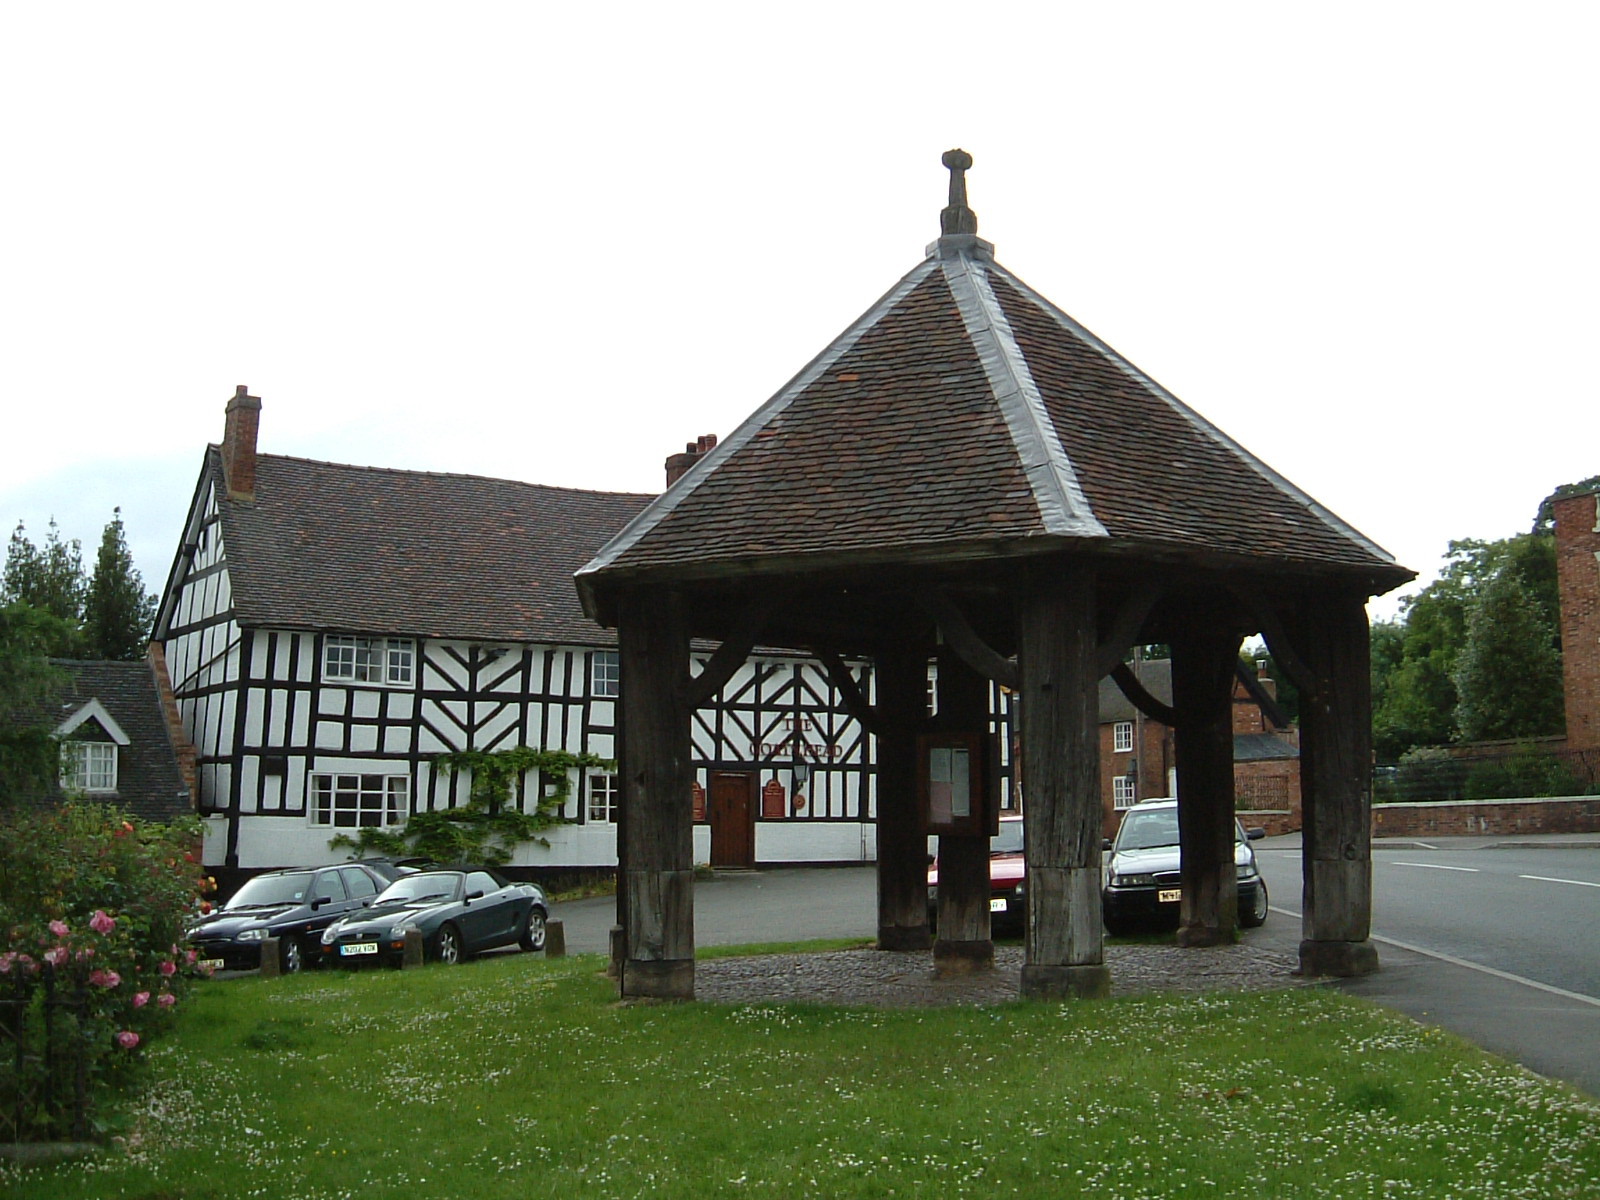 The Buttercross in Abbots Bromley